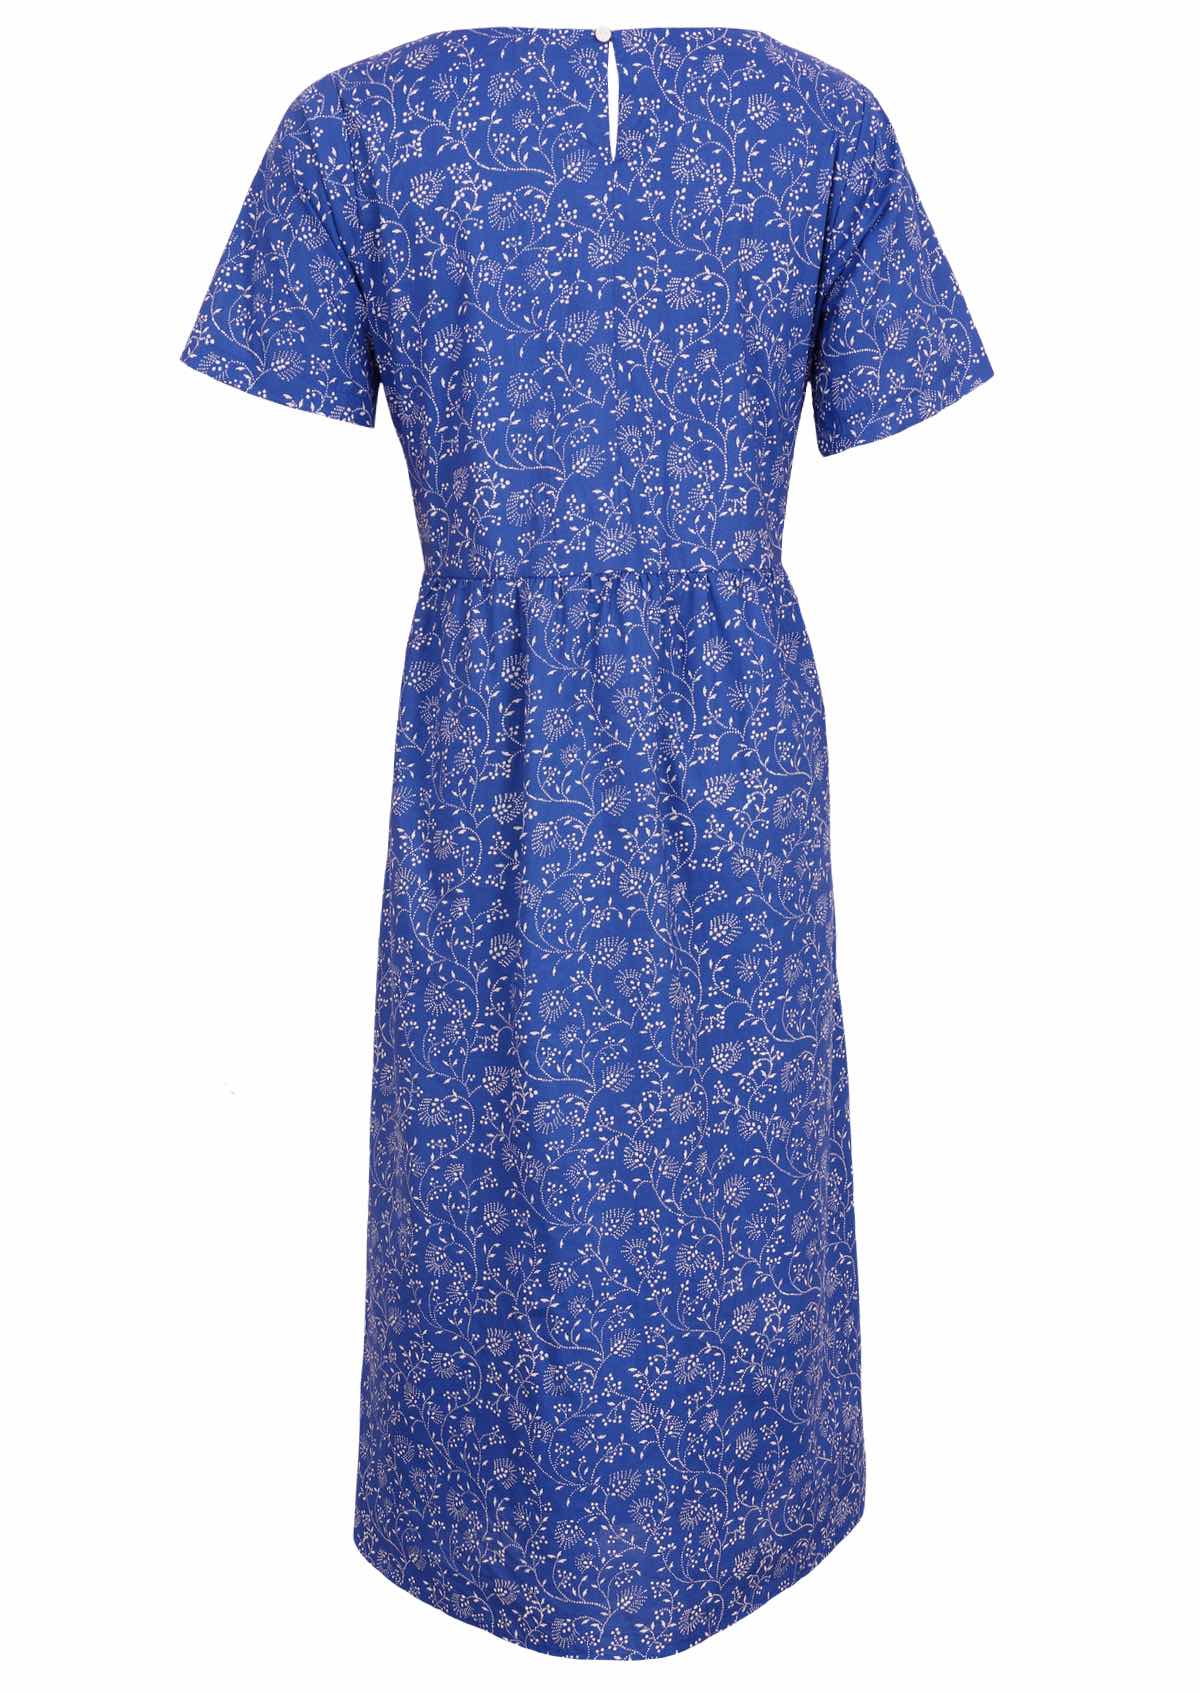 Mid calf length dress with a keyhole button back, made from 100% cotton. 